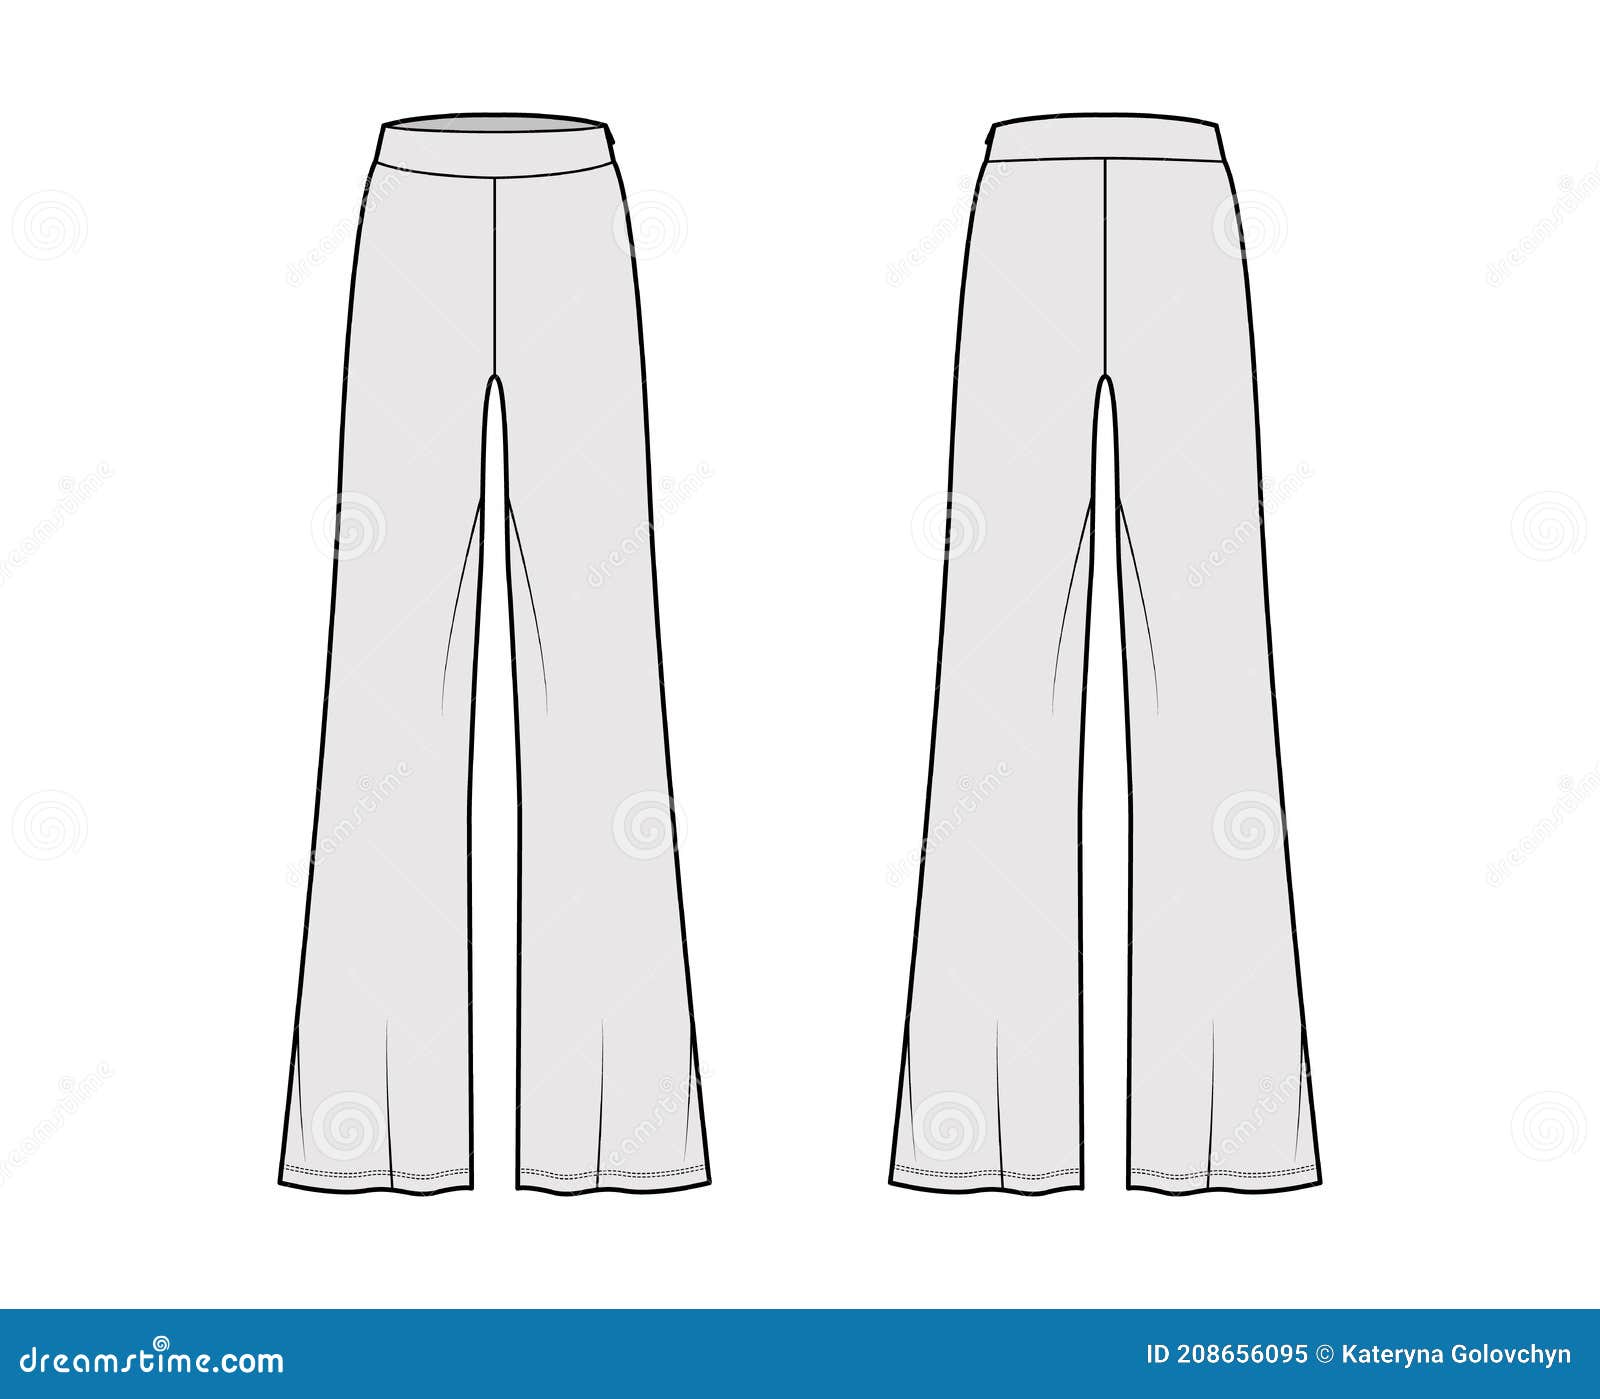 Pants Boot Cut Technical Fashion Illustration with Floor Length ...